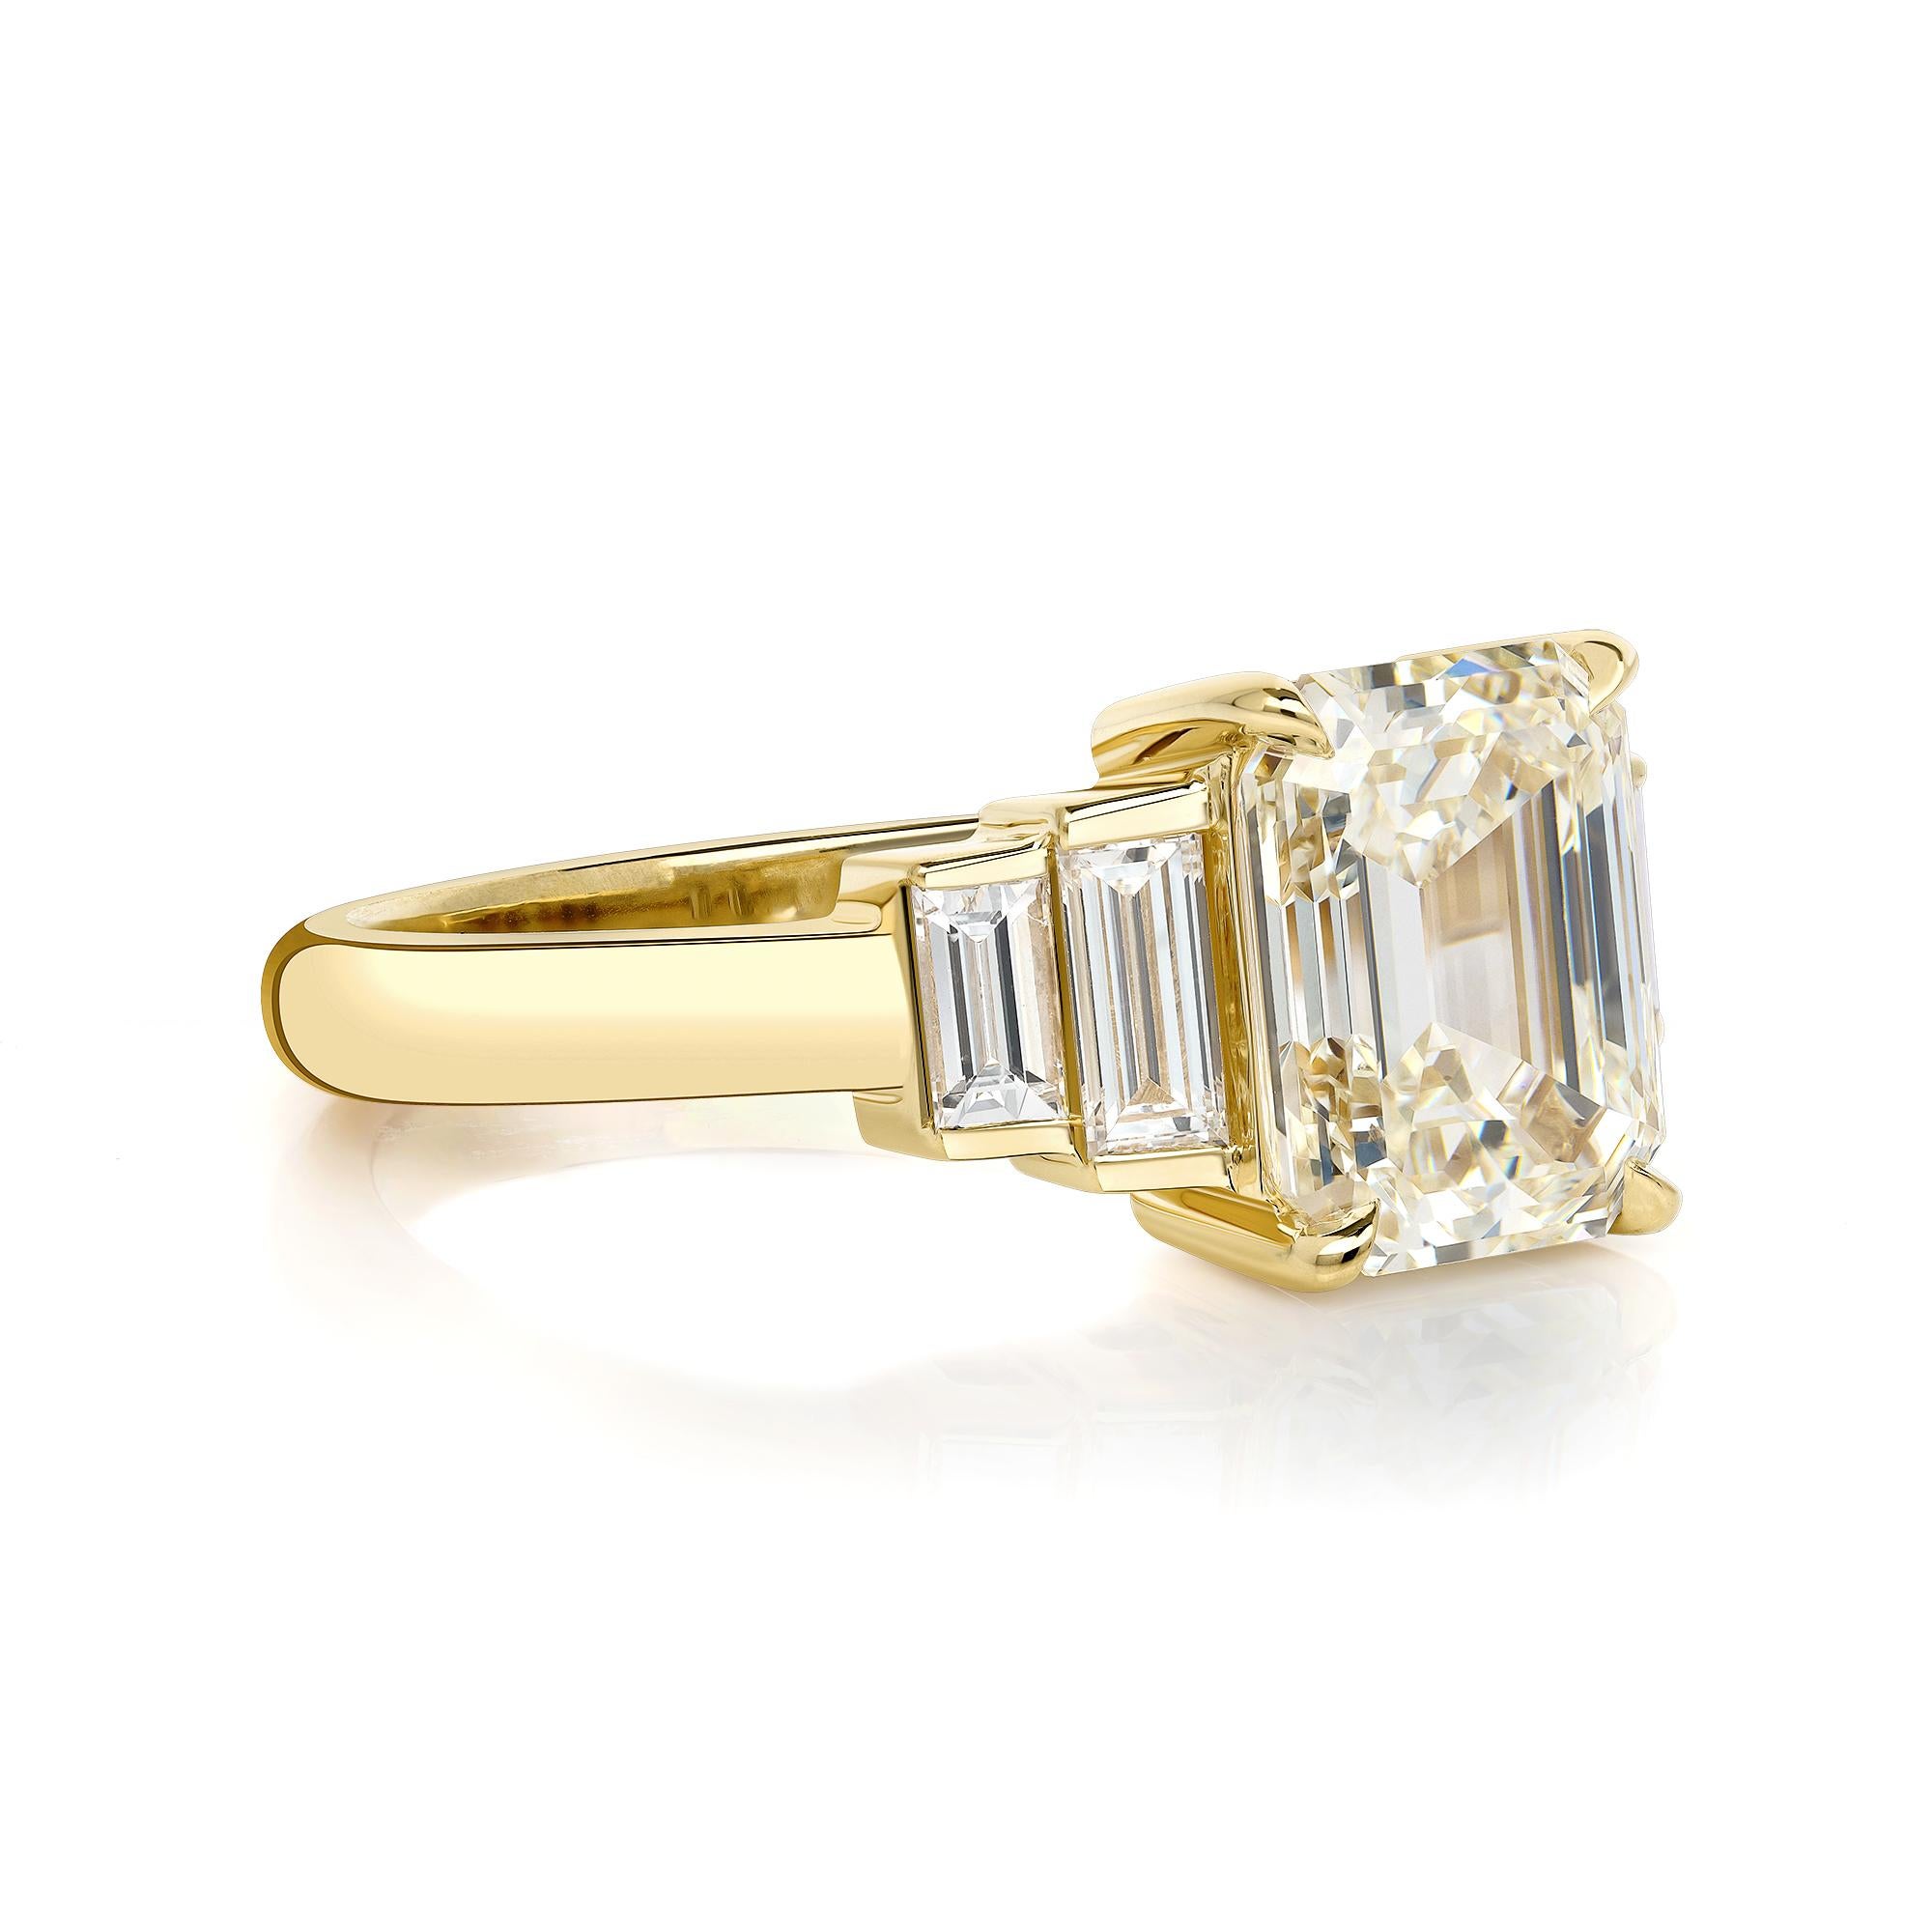 2.31ct K/VS1 GIA certified emerald cut diamond with 0.44ctw baguette cut accent diamonds prong set in a handcrafted 18K yellow gold mounting. 

 